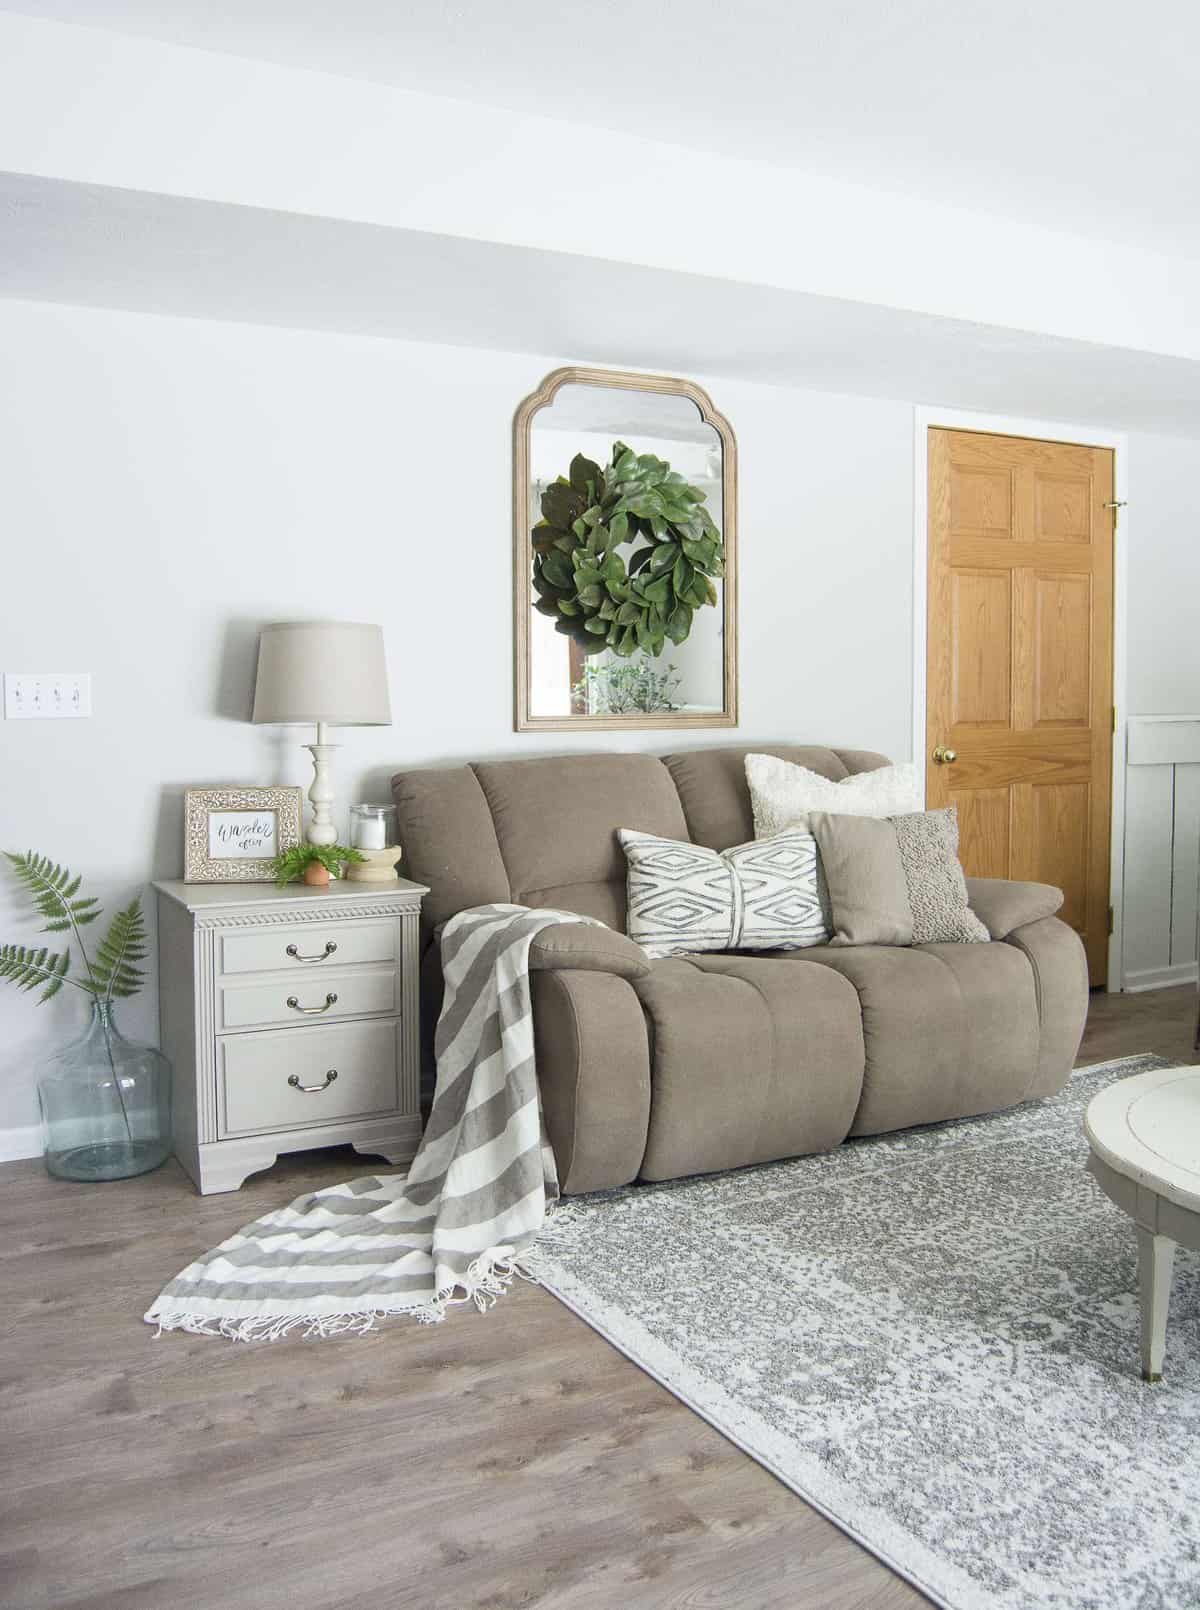 Do you struggle to keep your family room pretty and practical? Today I'm sharing my family room design and how I make it work for an active family of four. #fromhousetohaven #familyroomdesign #livingroom #homedecor